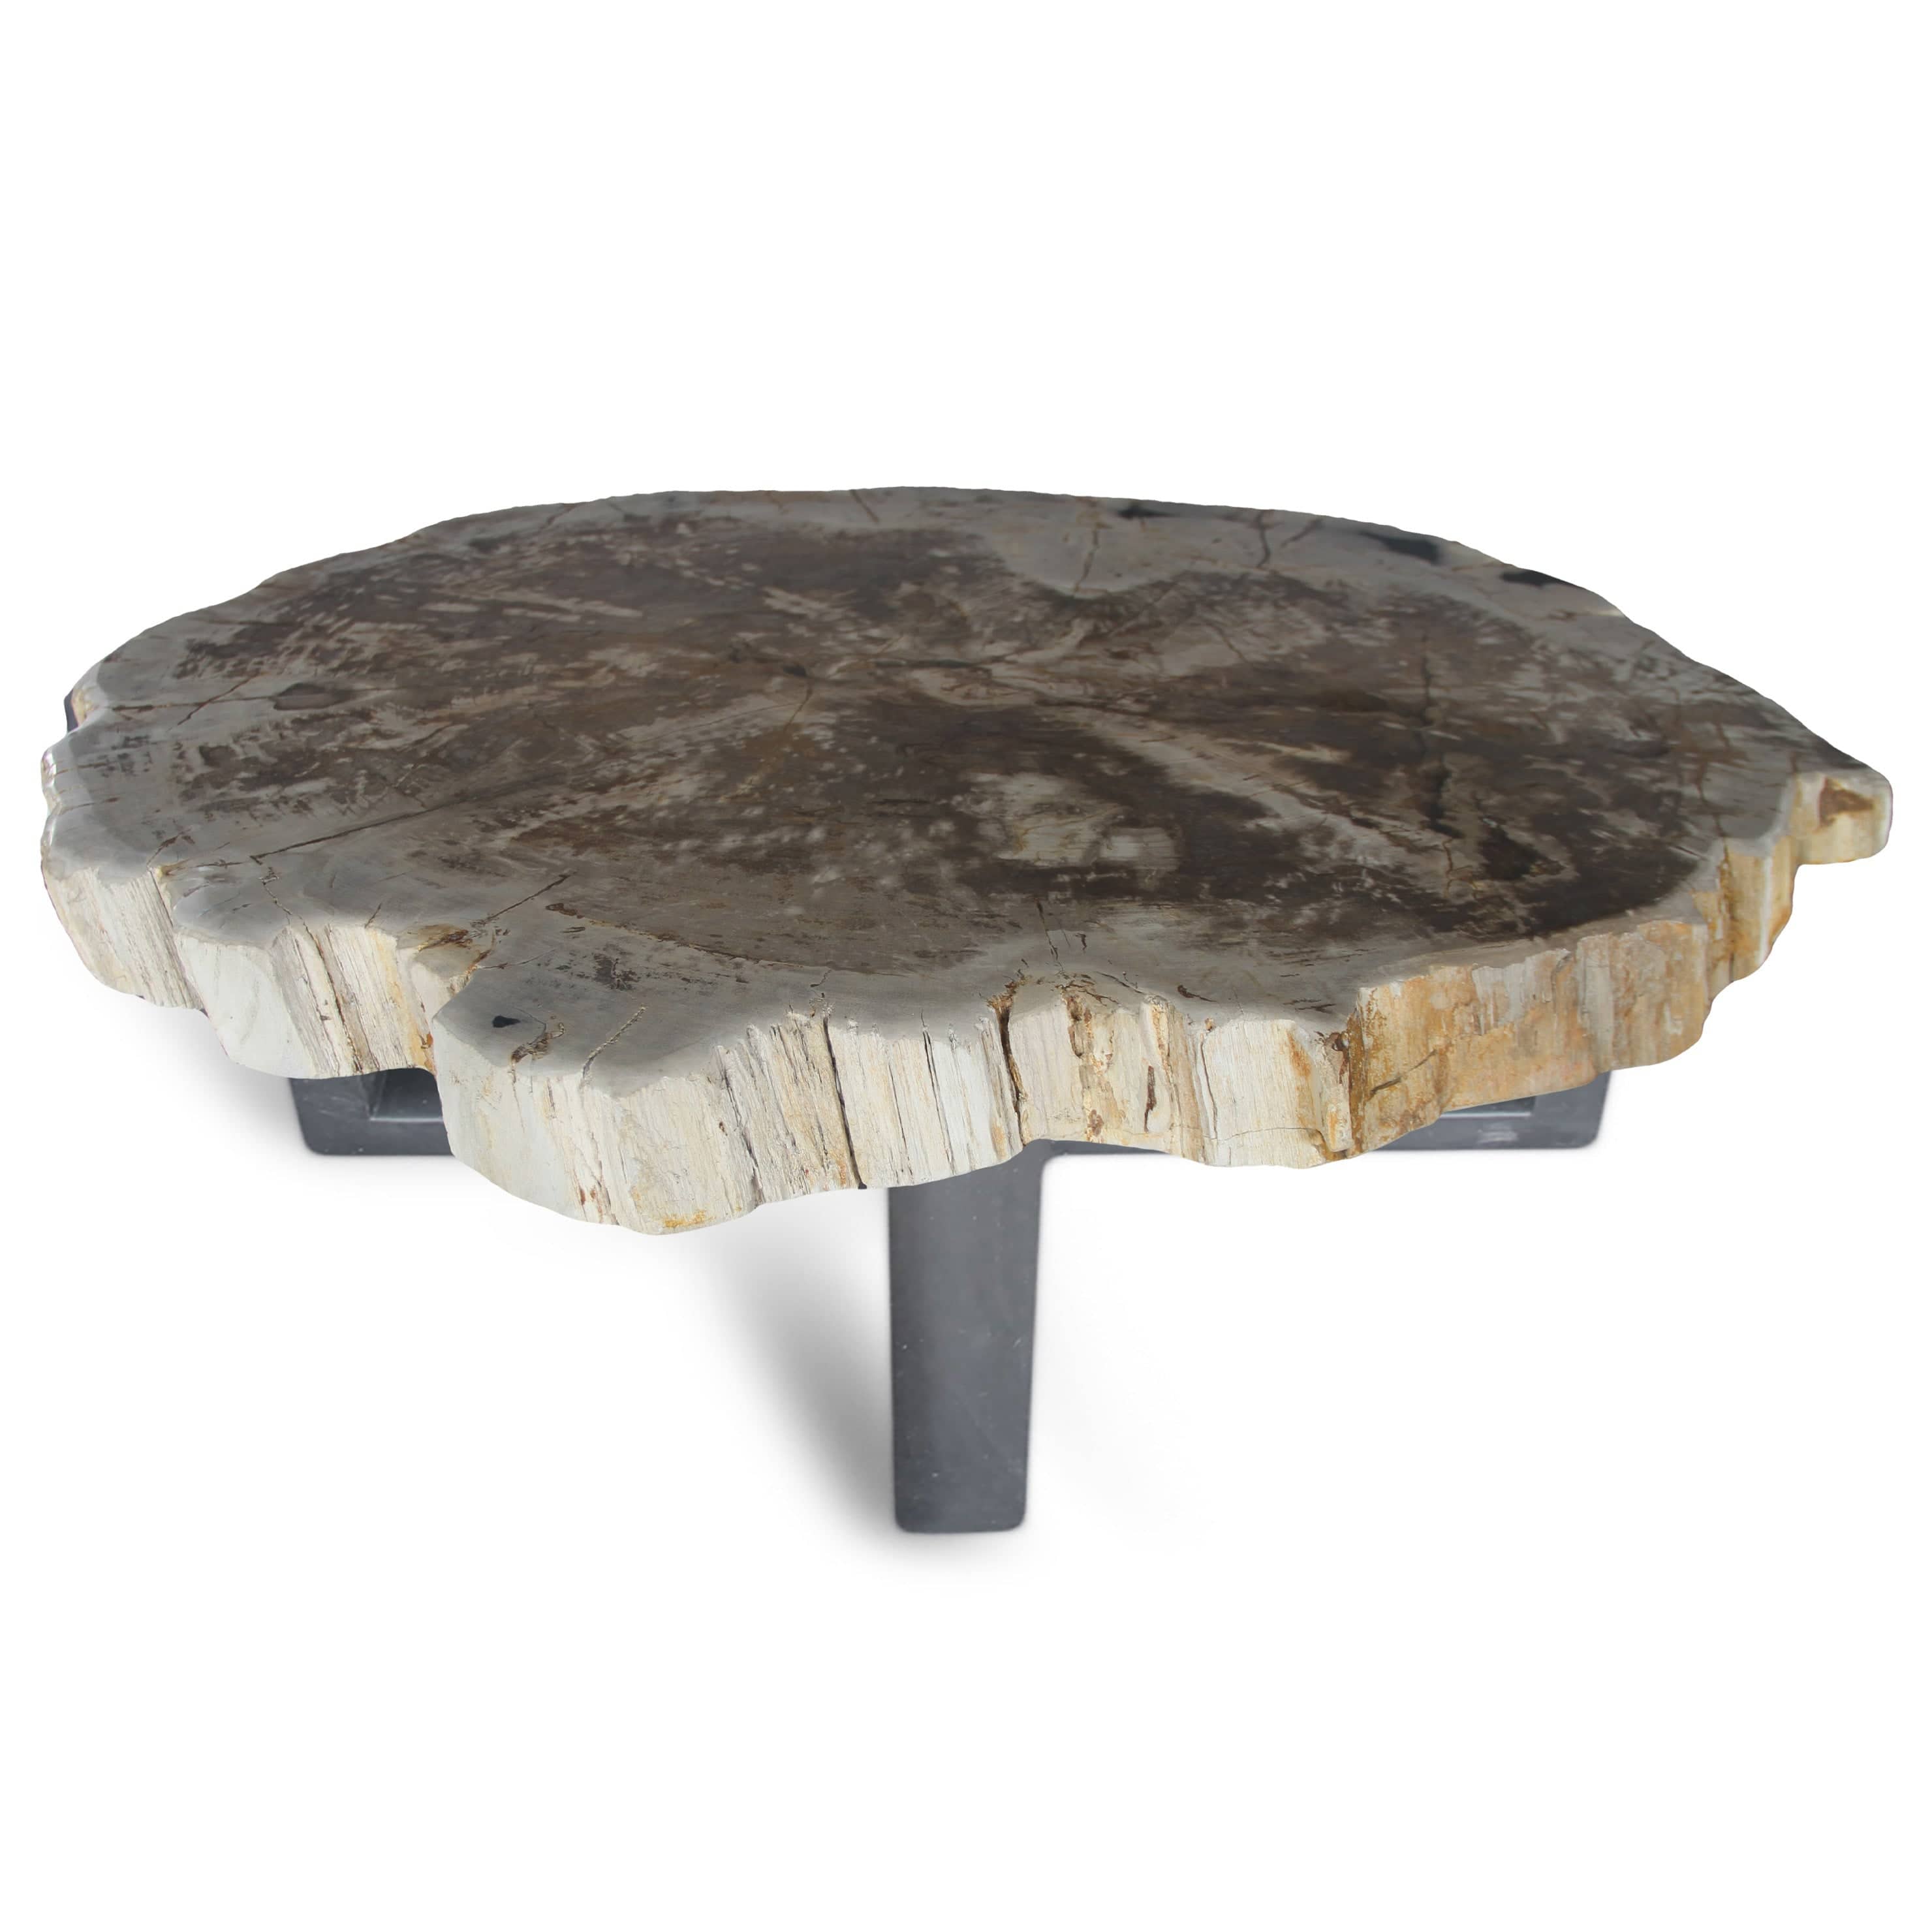 Kalifano Petrified Wood Petrified Wood Round Slab Coffee Table from Indonesia - 38" / 238 lbs PWT8800.002